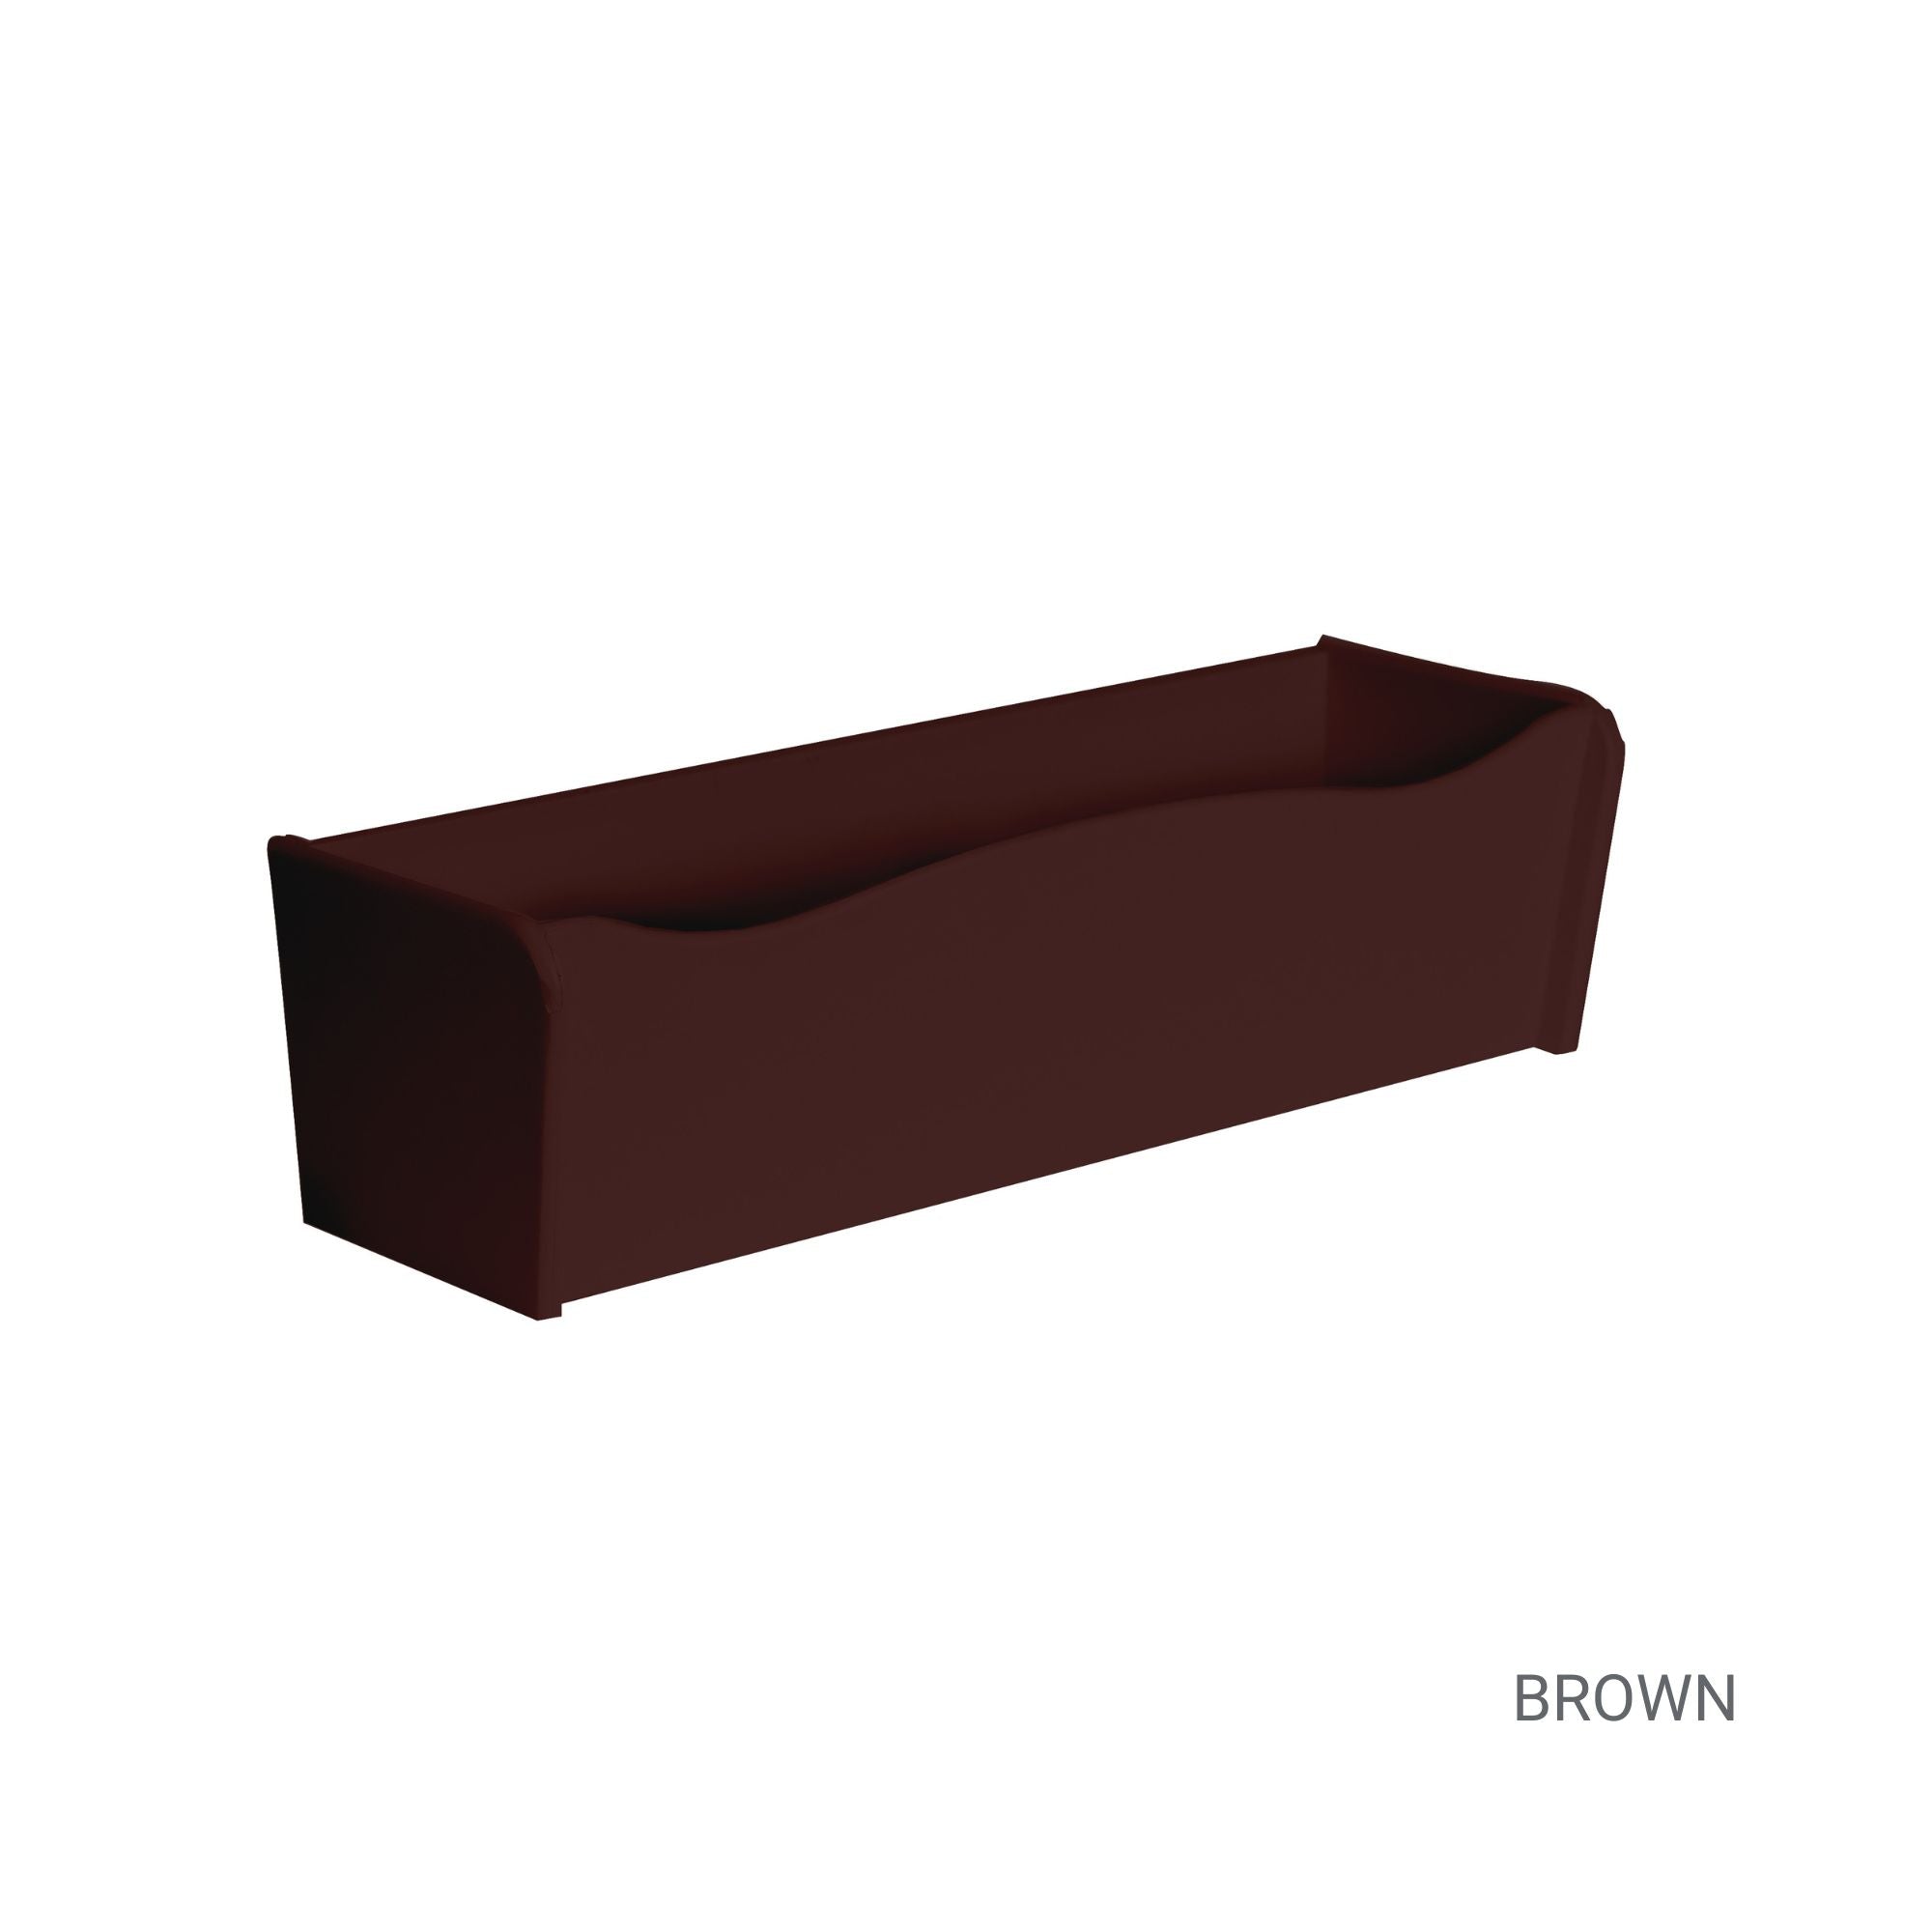 18" x 6" x 5" Brown Flower Box for Window Sills, Sheds, Playhouses, and MORE